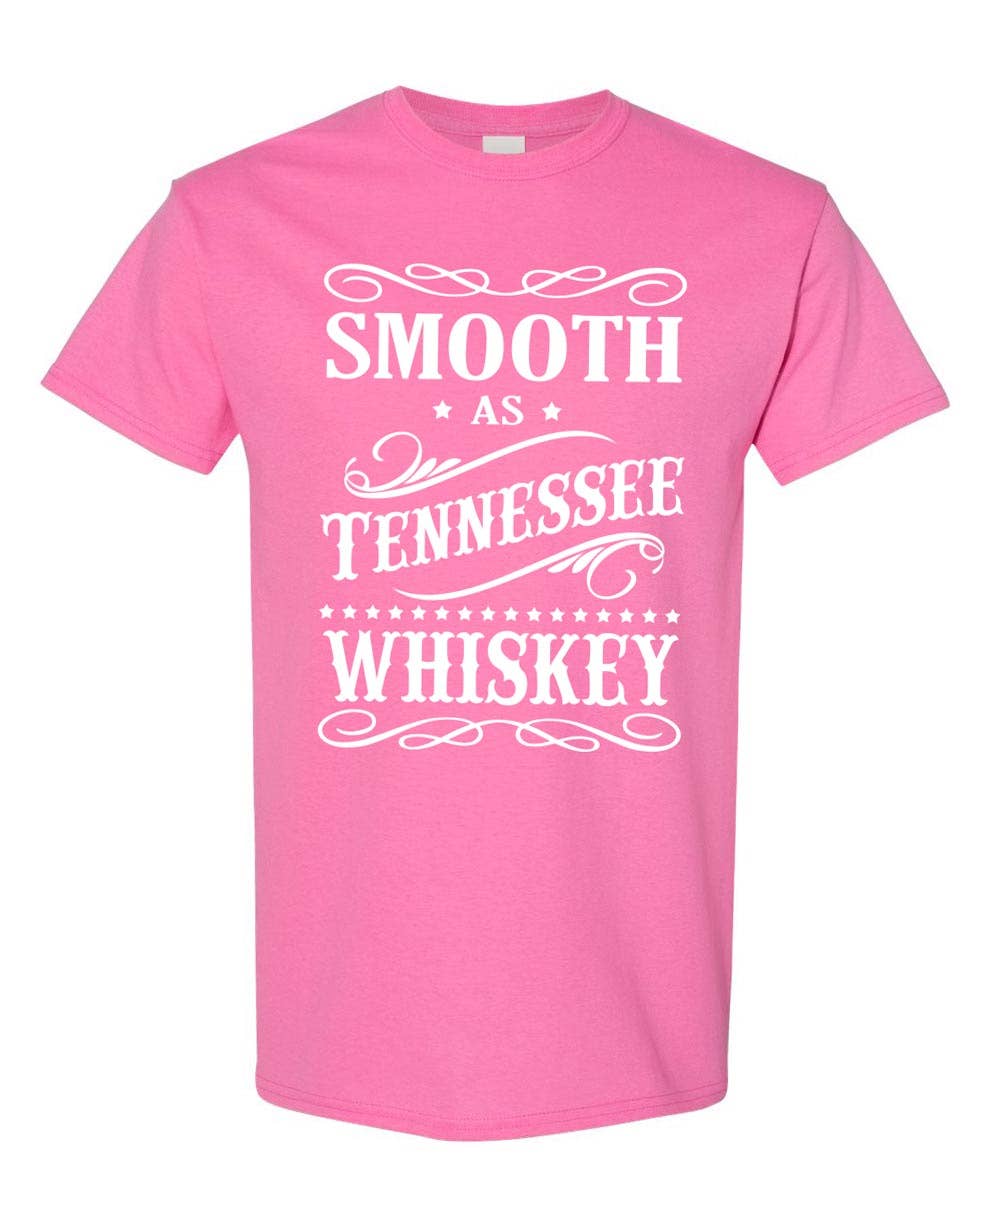 Tennessee t-shirt smooth as Tennessee whiskey, pink.